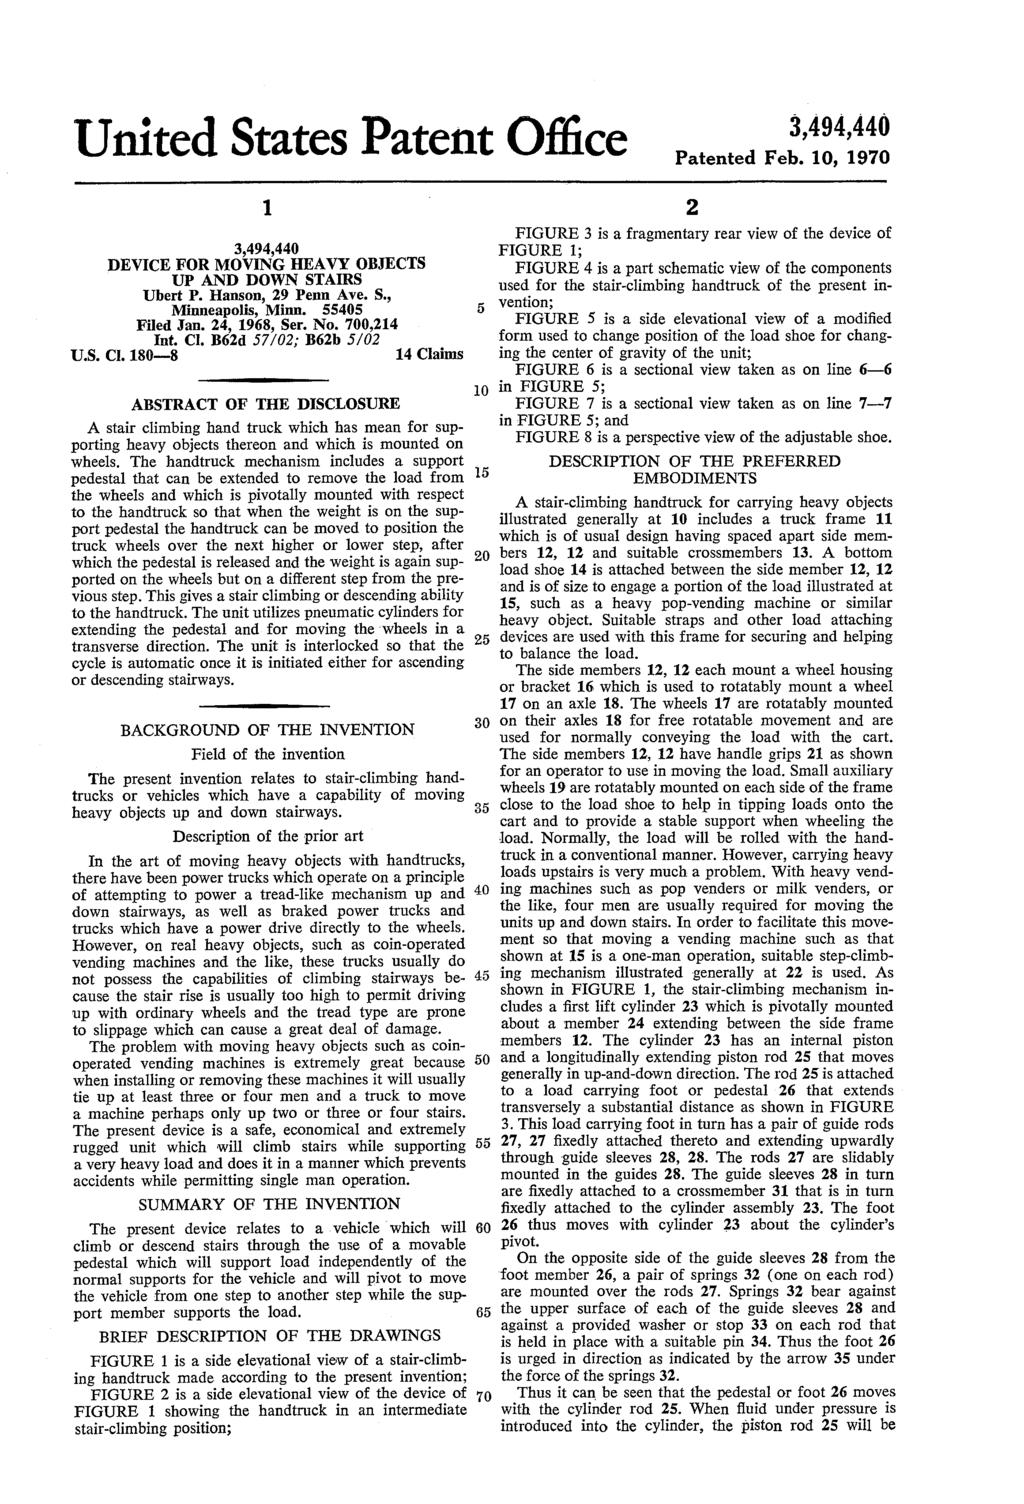 United States Patent Office Patented Feb. 10, 1970 DEVICE FOR MOVING HEAVY OBJECTS UP AND DOWN STAIRS Ubert P. Hanson, 29 Penn Ave. S., Minneapolis, Minn. Filed Jan. 24, 1968, Ser. No. 700,214 Int, C.